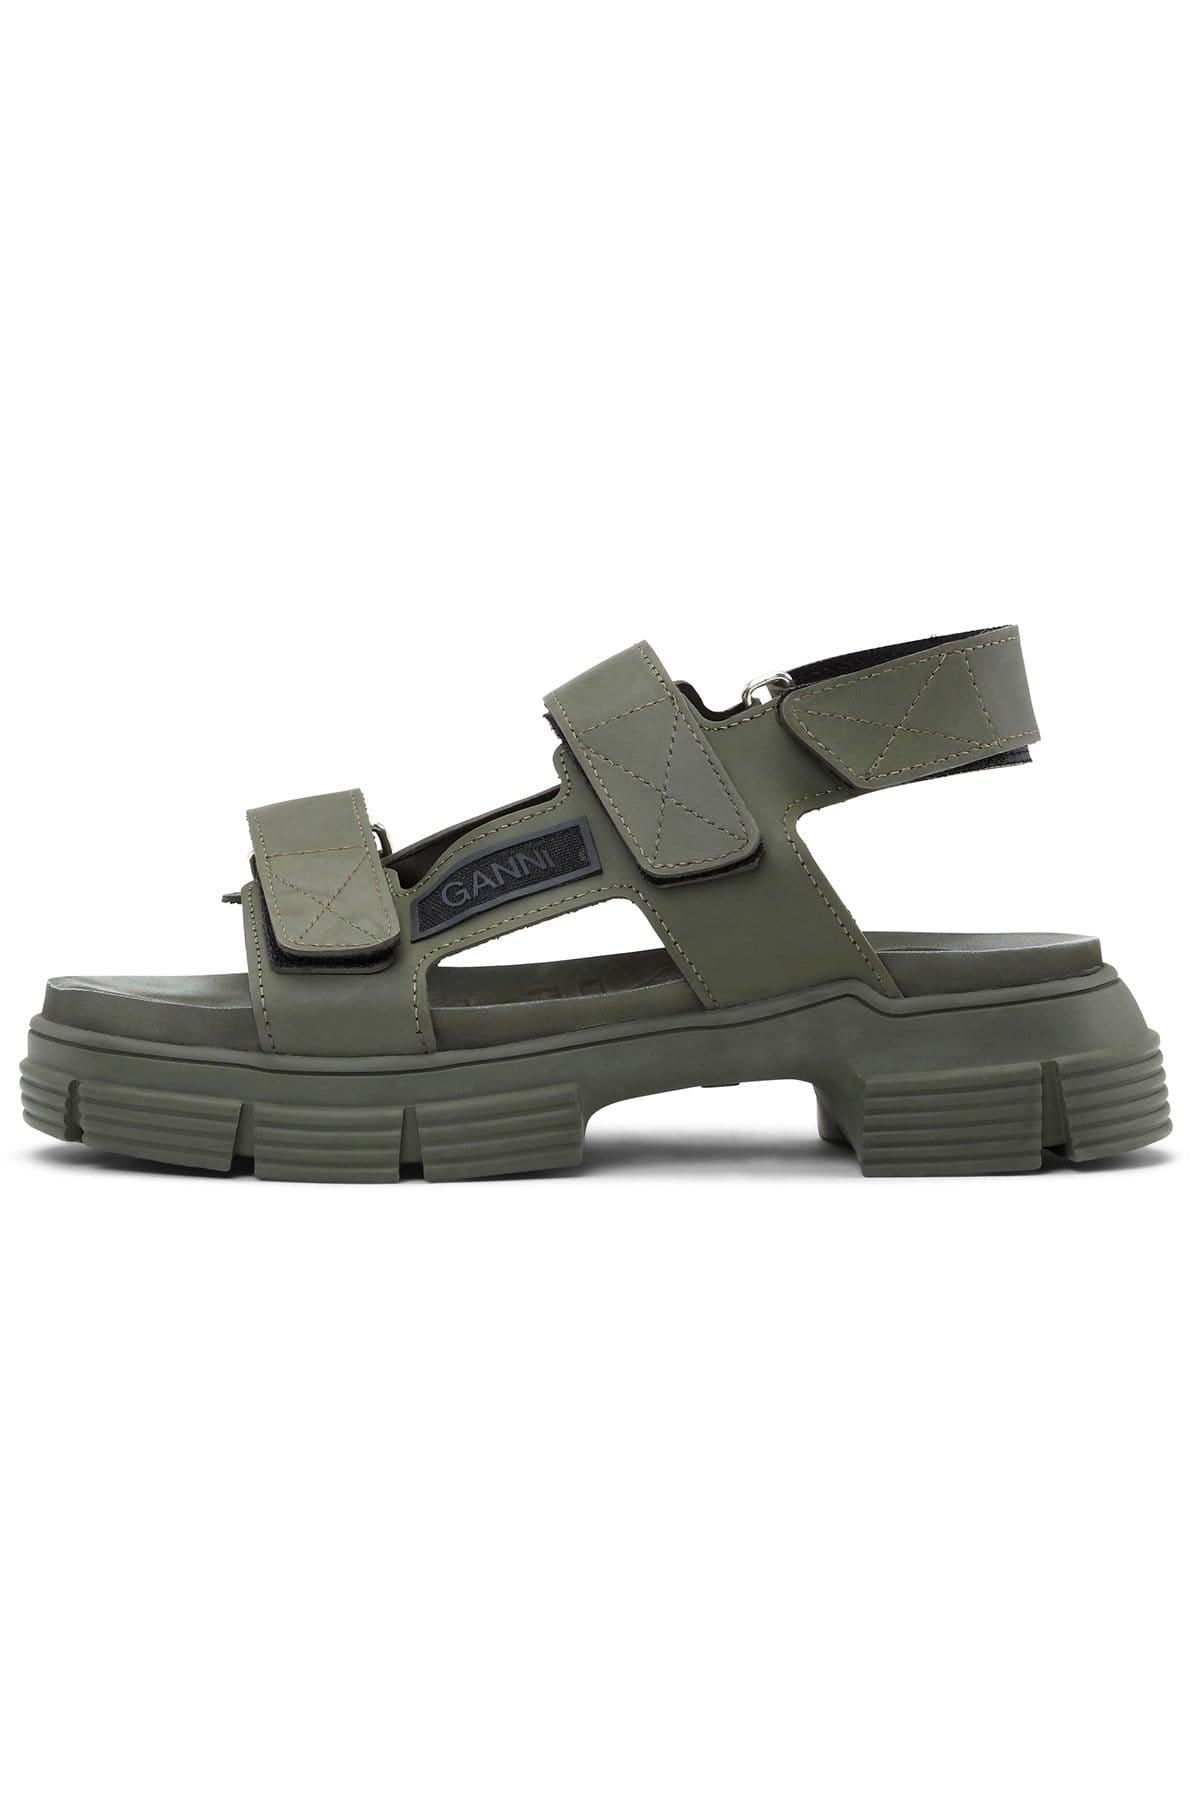 Ganni Recycled Rubber Sandal in Green | Lyst